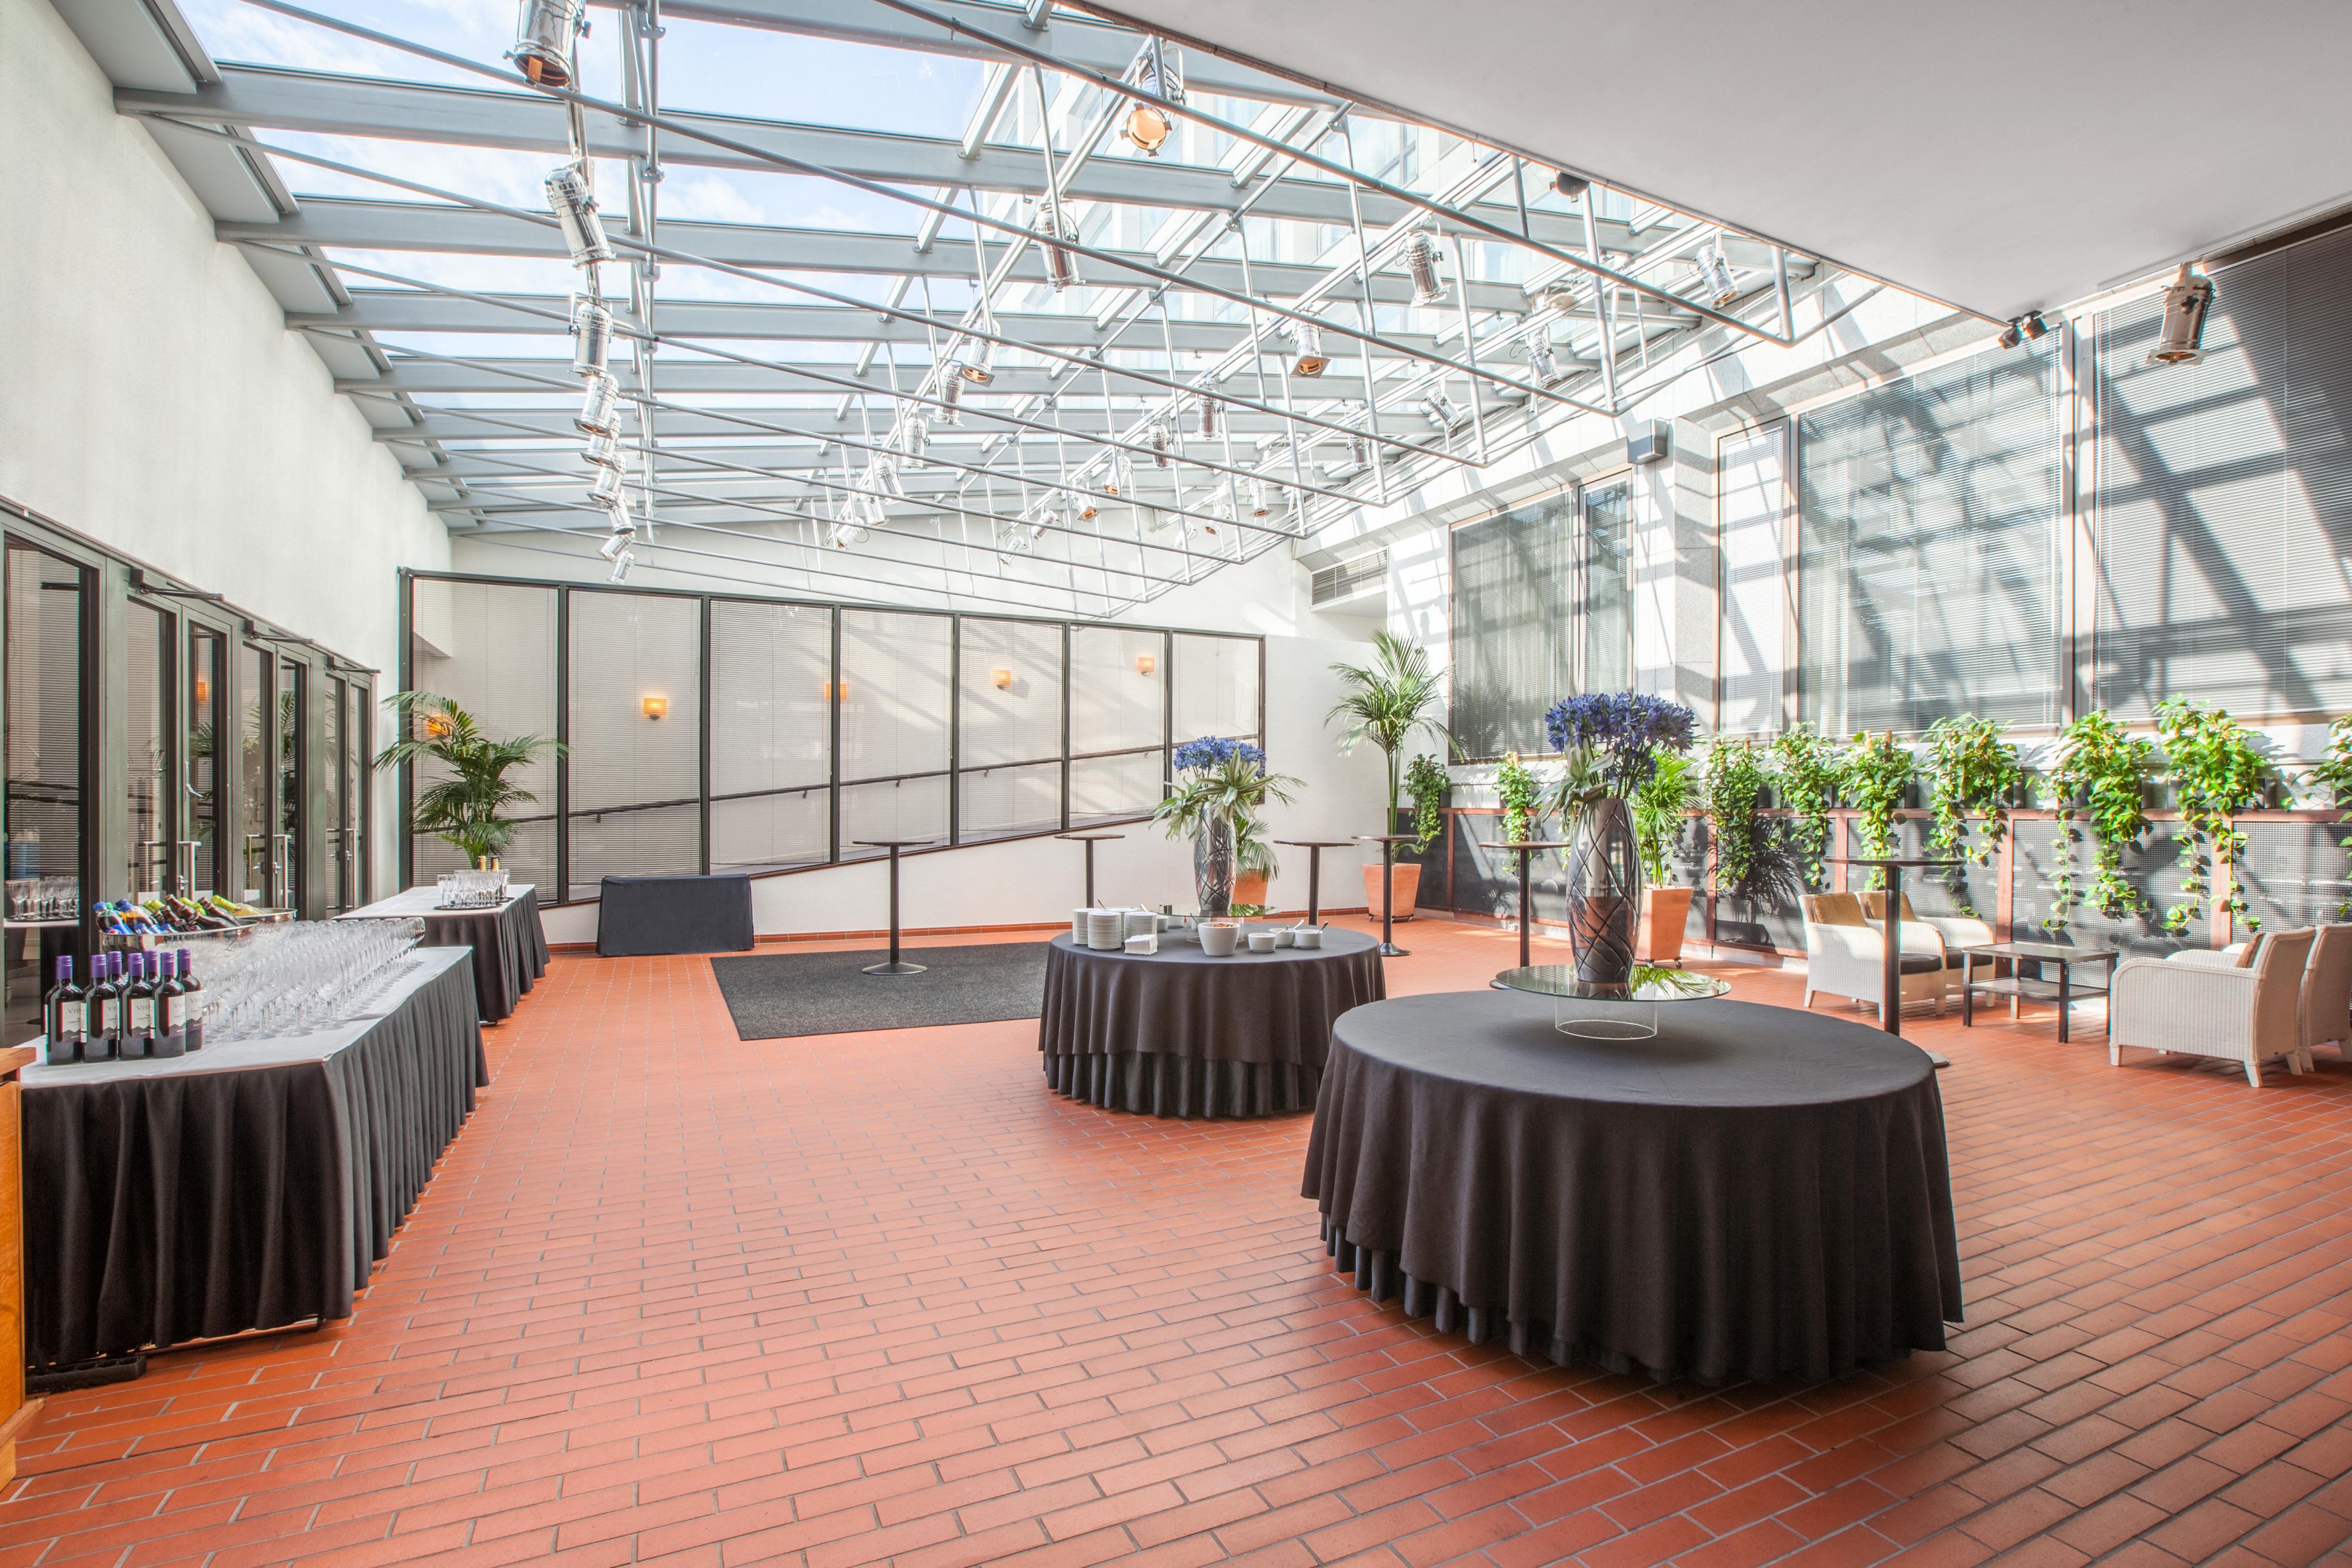 Winter Garden is perfect place to arrange get-together-parties